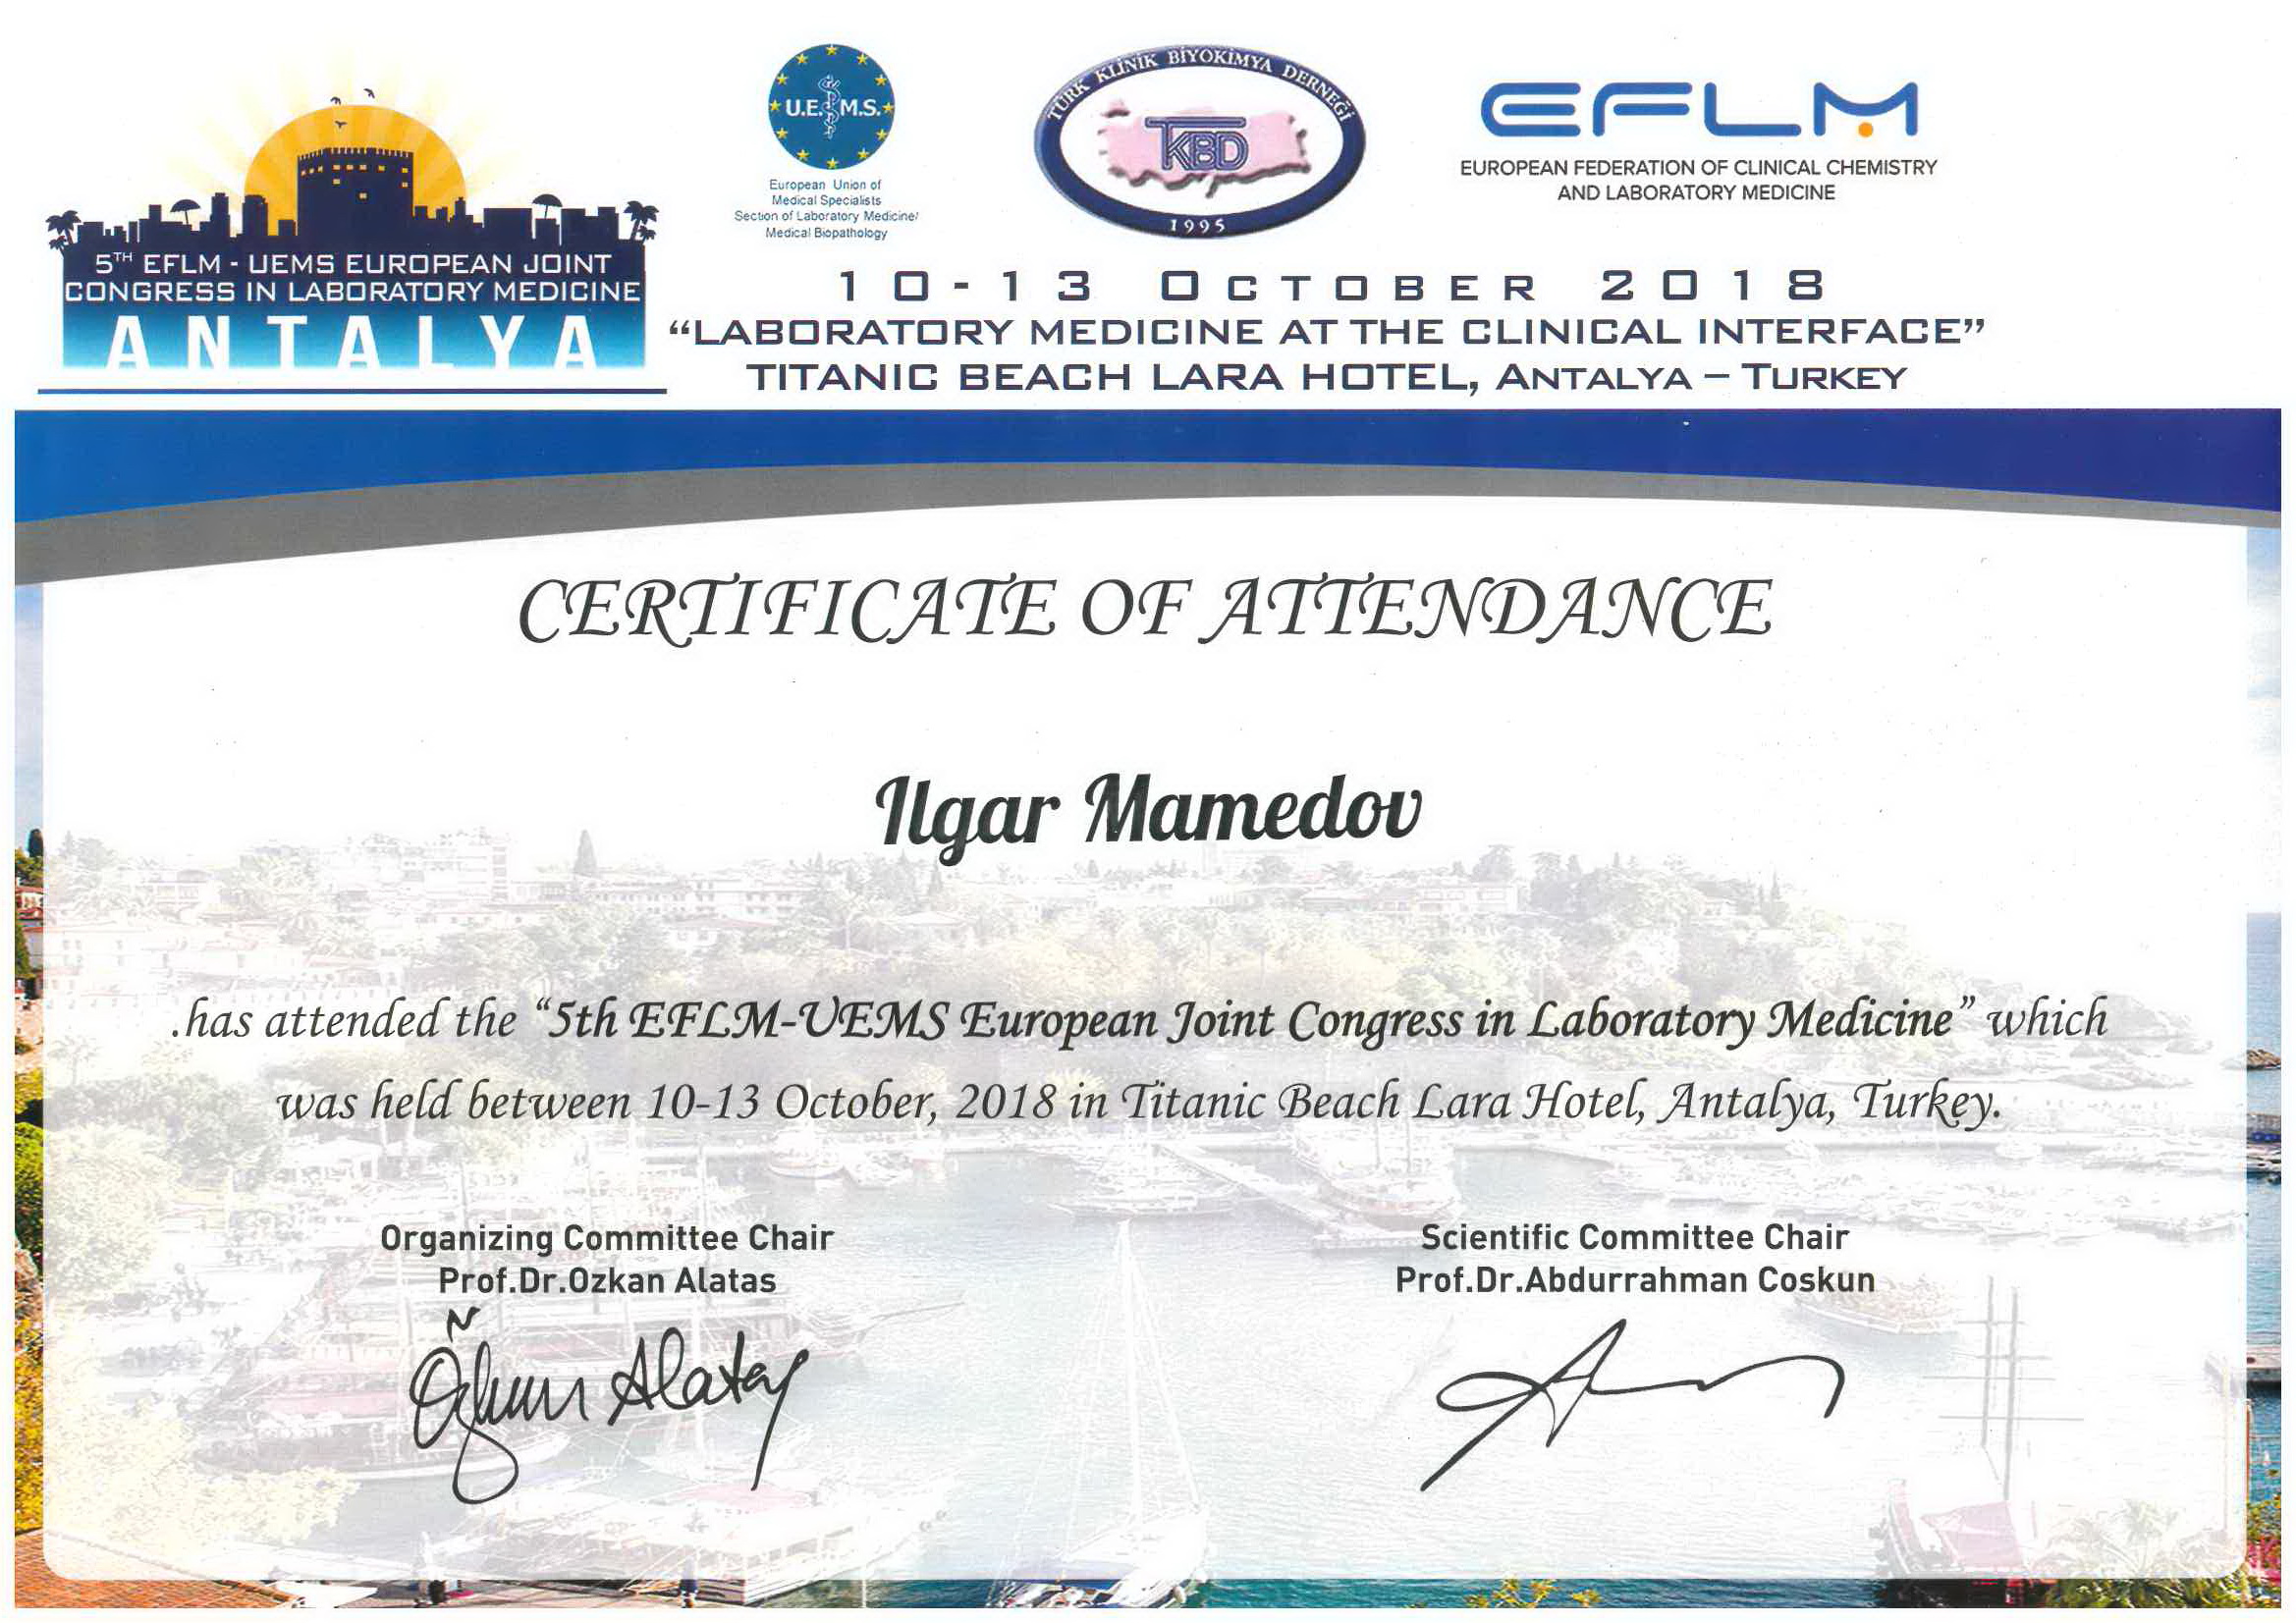 CERTIFICATE OF ATTENDANCE has attended the 5th EFLM-UEMS European Joint Congress in Laboratory Medicine. 2018 (ИМЕННОЙ)